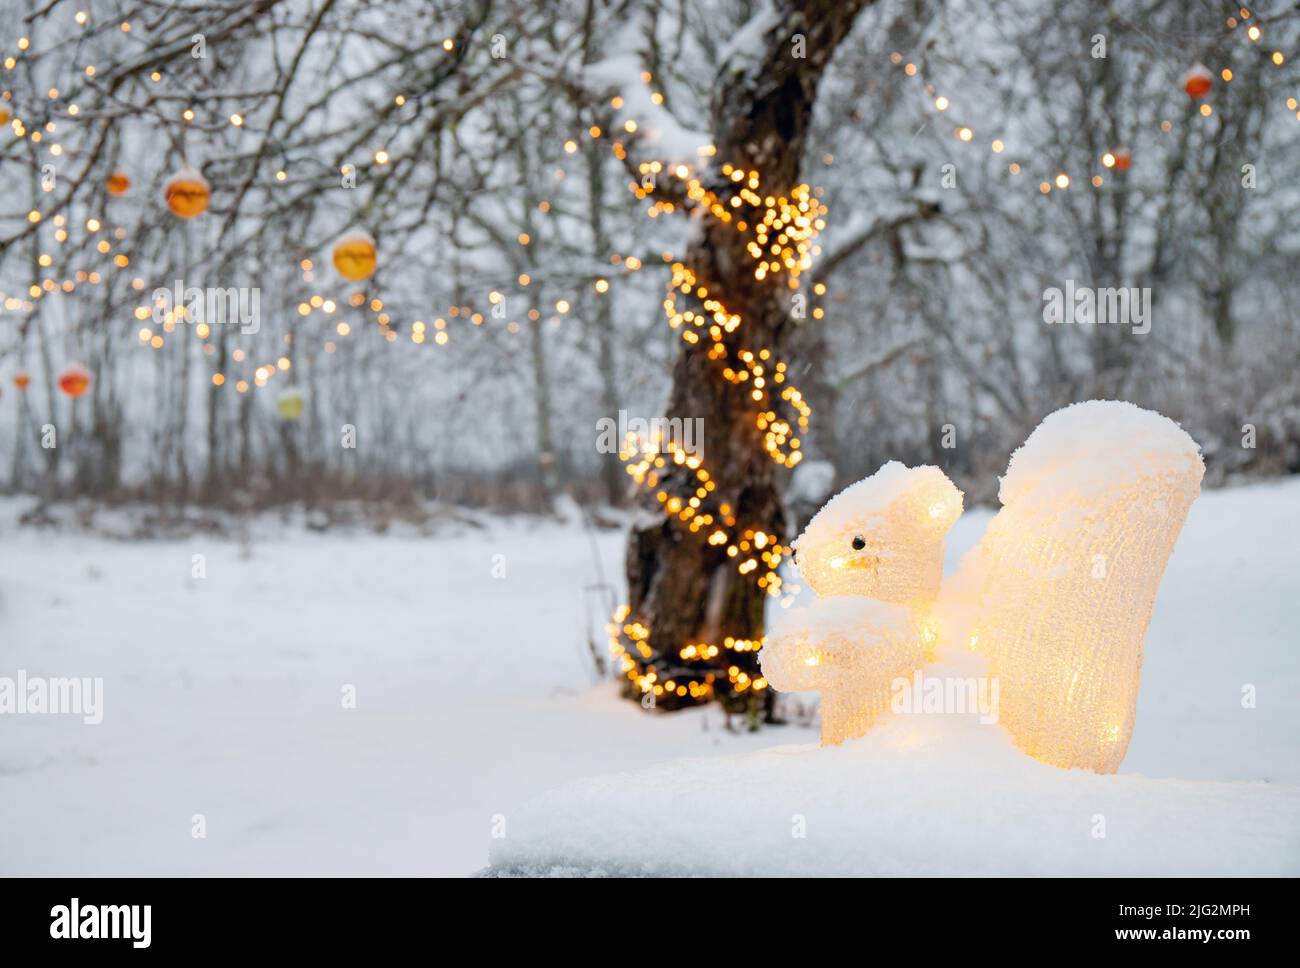 Acrylic artificial squirrel figurine illuminated as Christmas decoration outdoors in home garden, led party lights wrapped around apple tree. Stock Photo